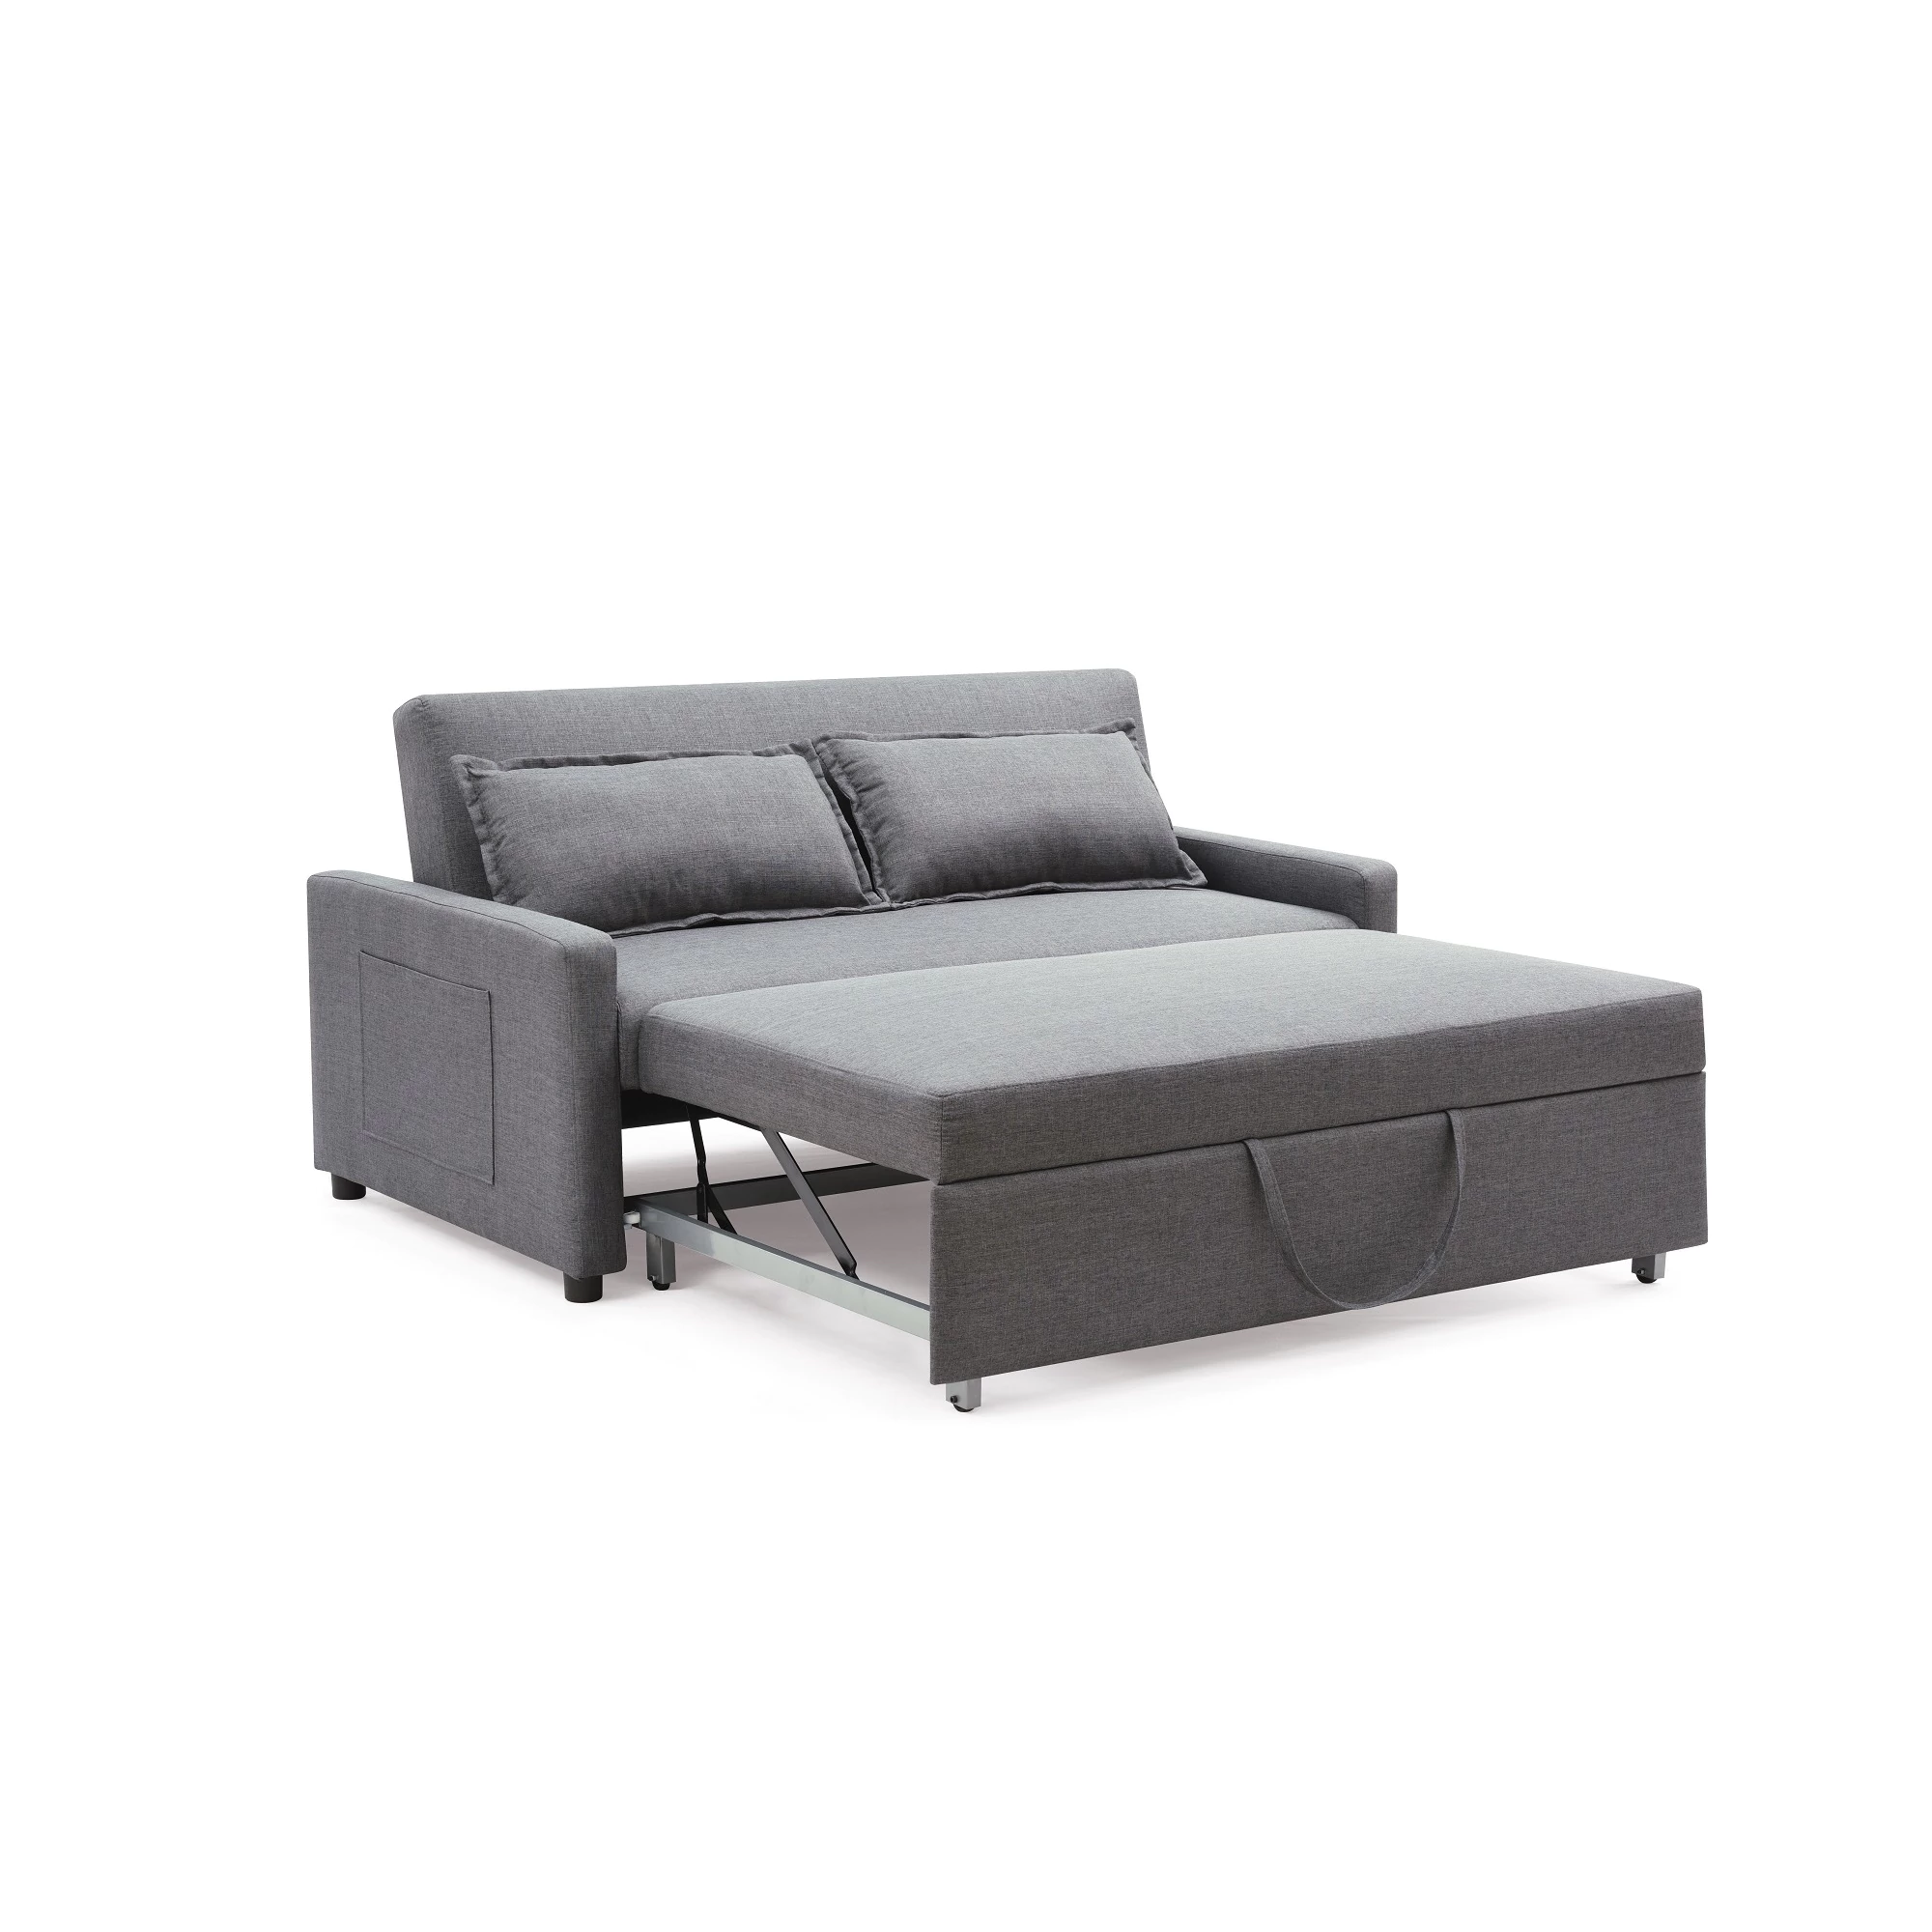 pull out couch the curated nomad stadtmuller convertible sofa with pullout bed - free WLNHKKB